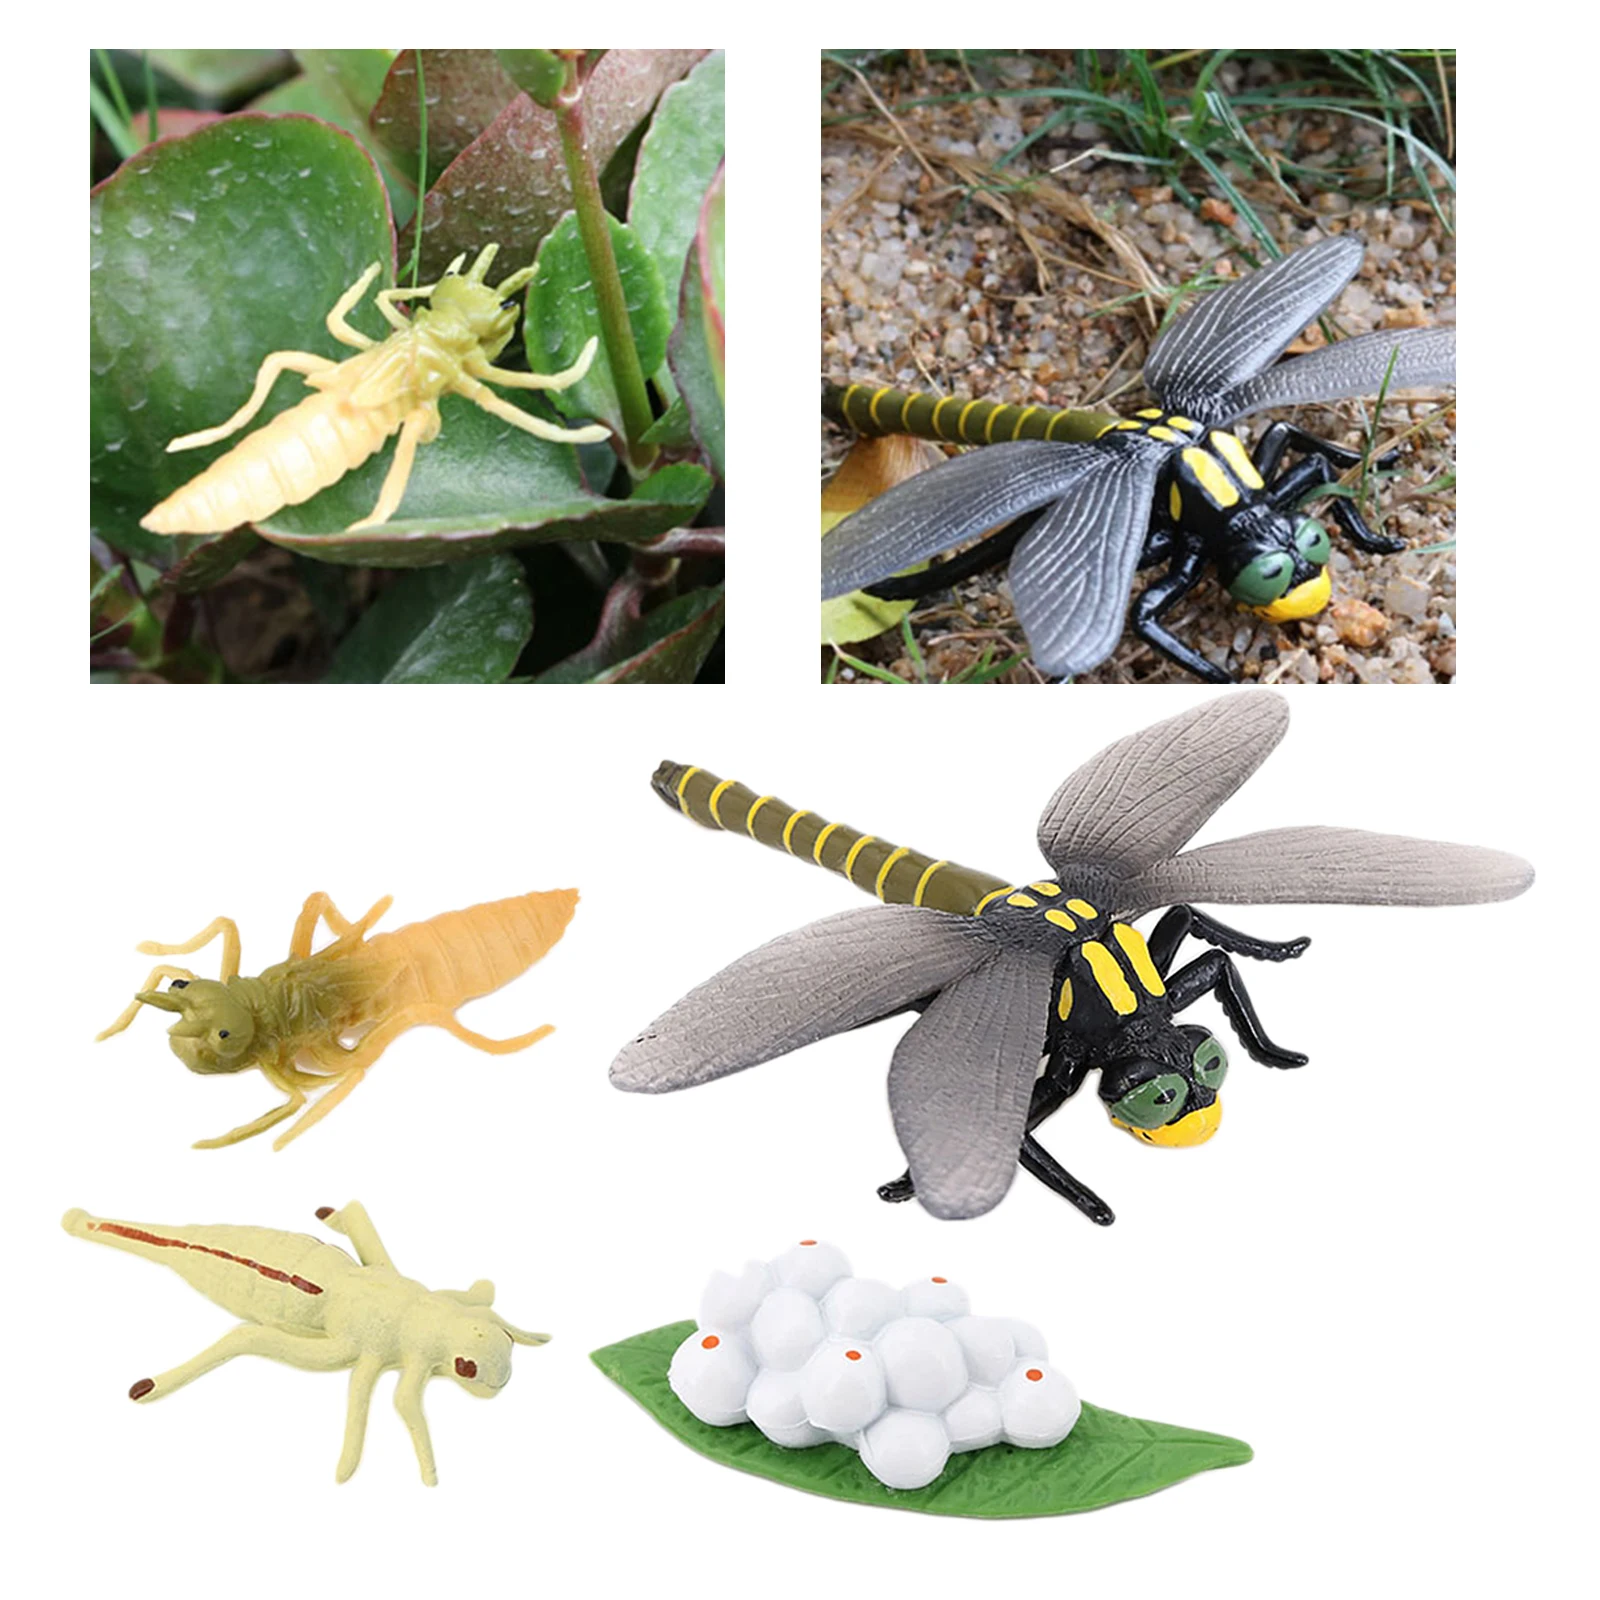 4 Stages Life Cycle of Dragonfly Nature Insects Life Cycles Growth Model Game Prop Insect Animal Natural Toy